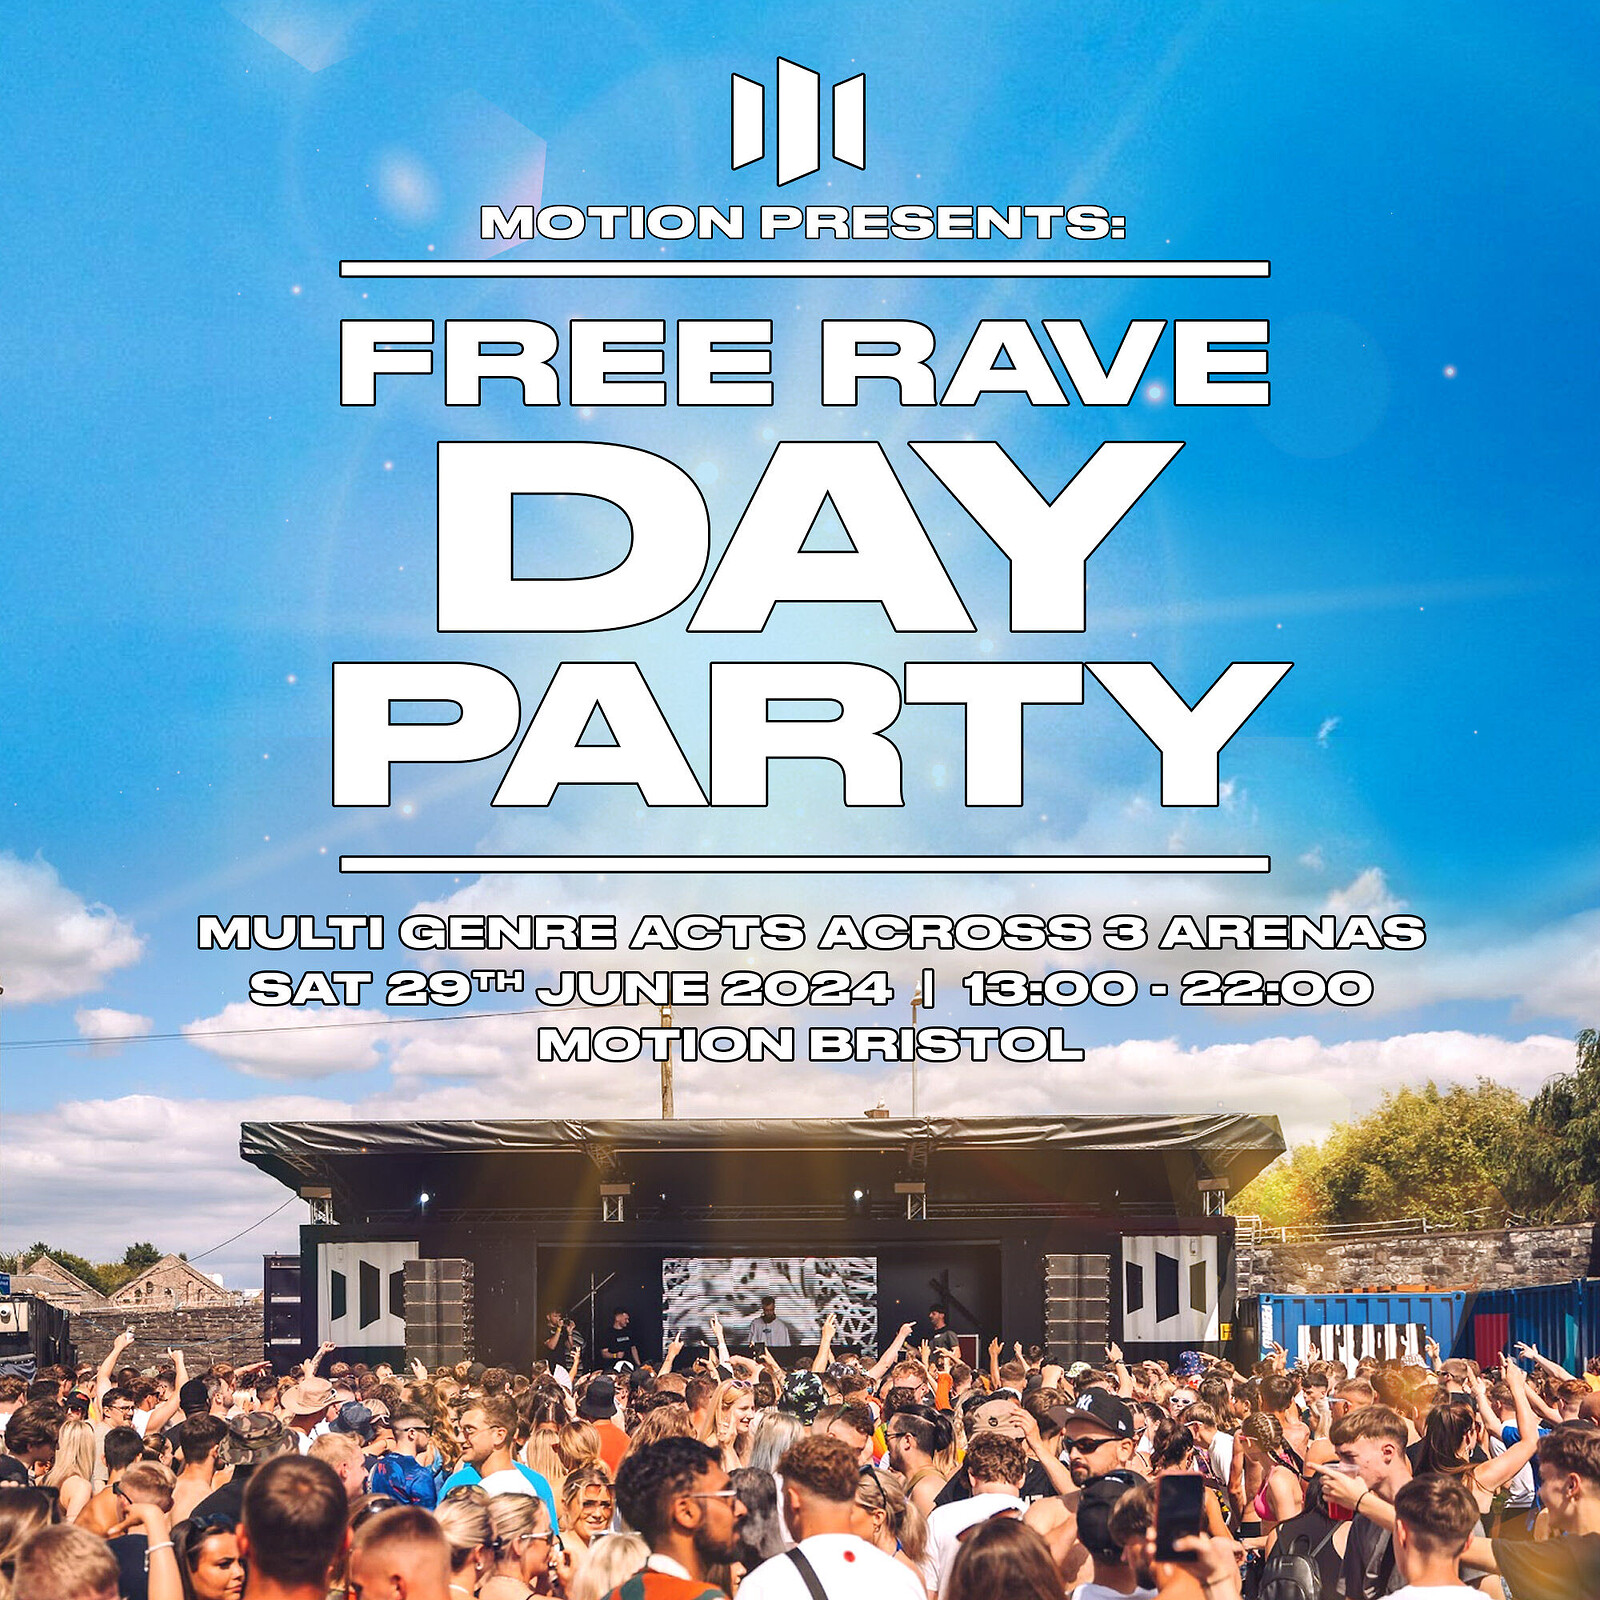 Motion Presents: Rave Day Party at Motion